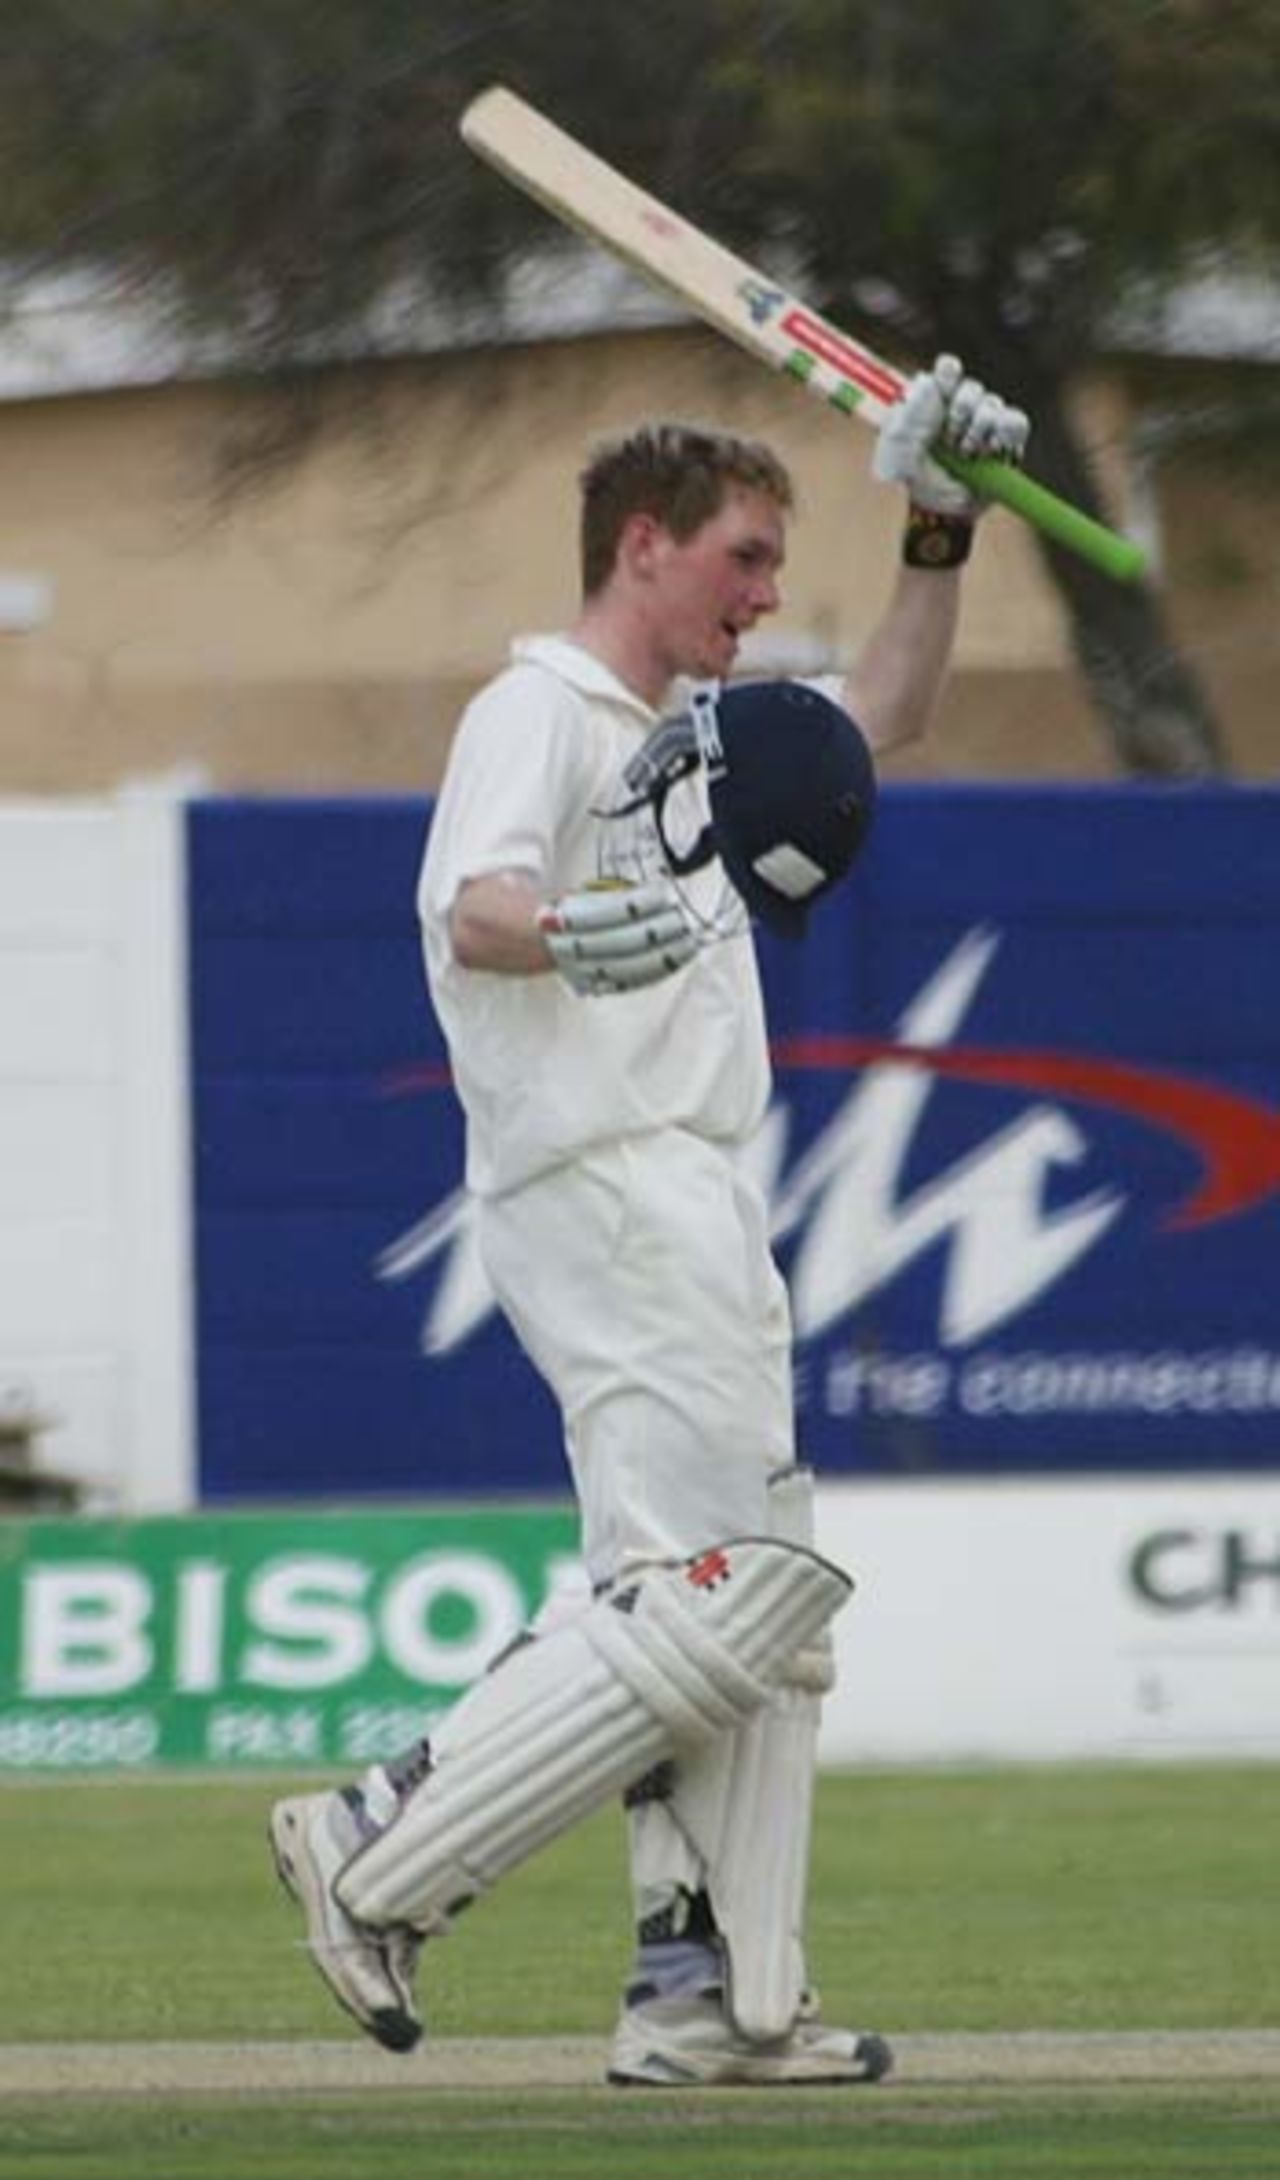 Eion Morgan celebrates his century for Ireland against UAE in the Intercontinental Cup semi-final, Windhoek, October 23, 2005